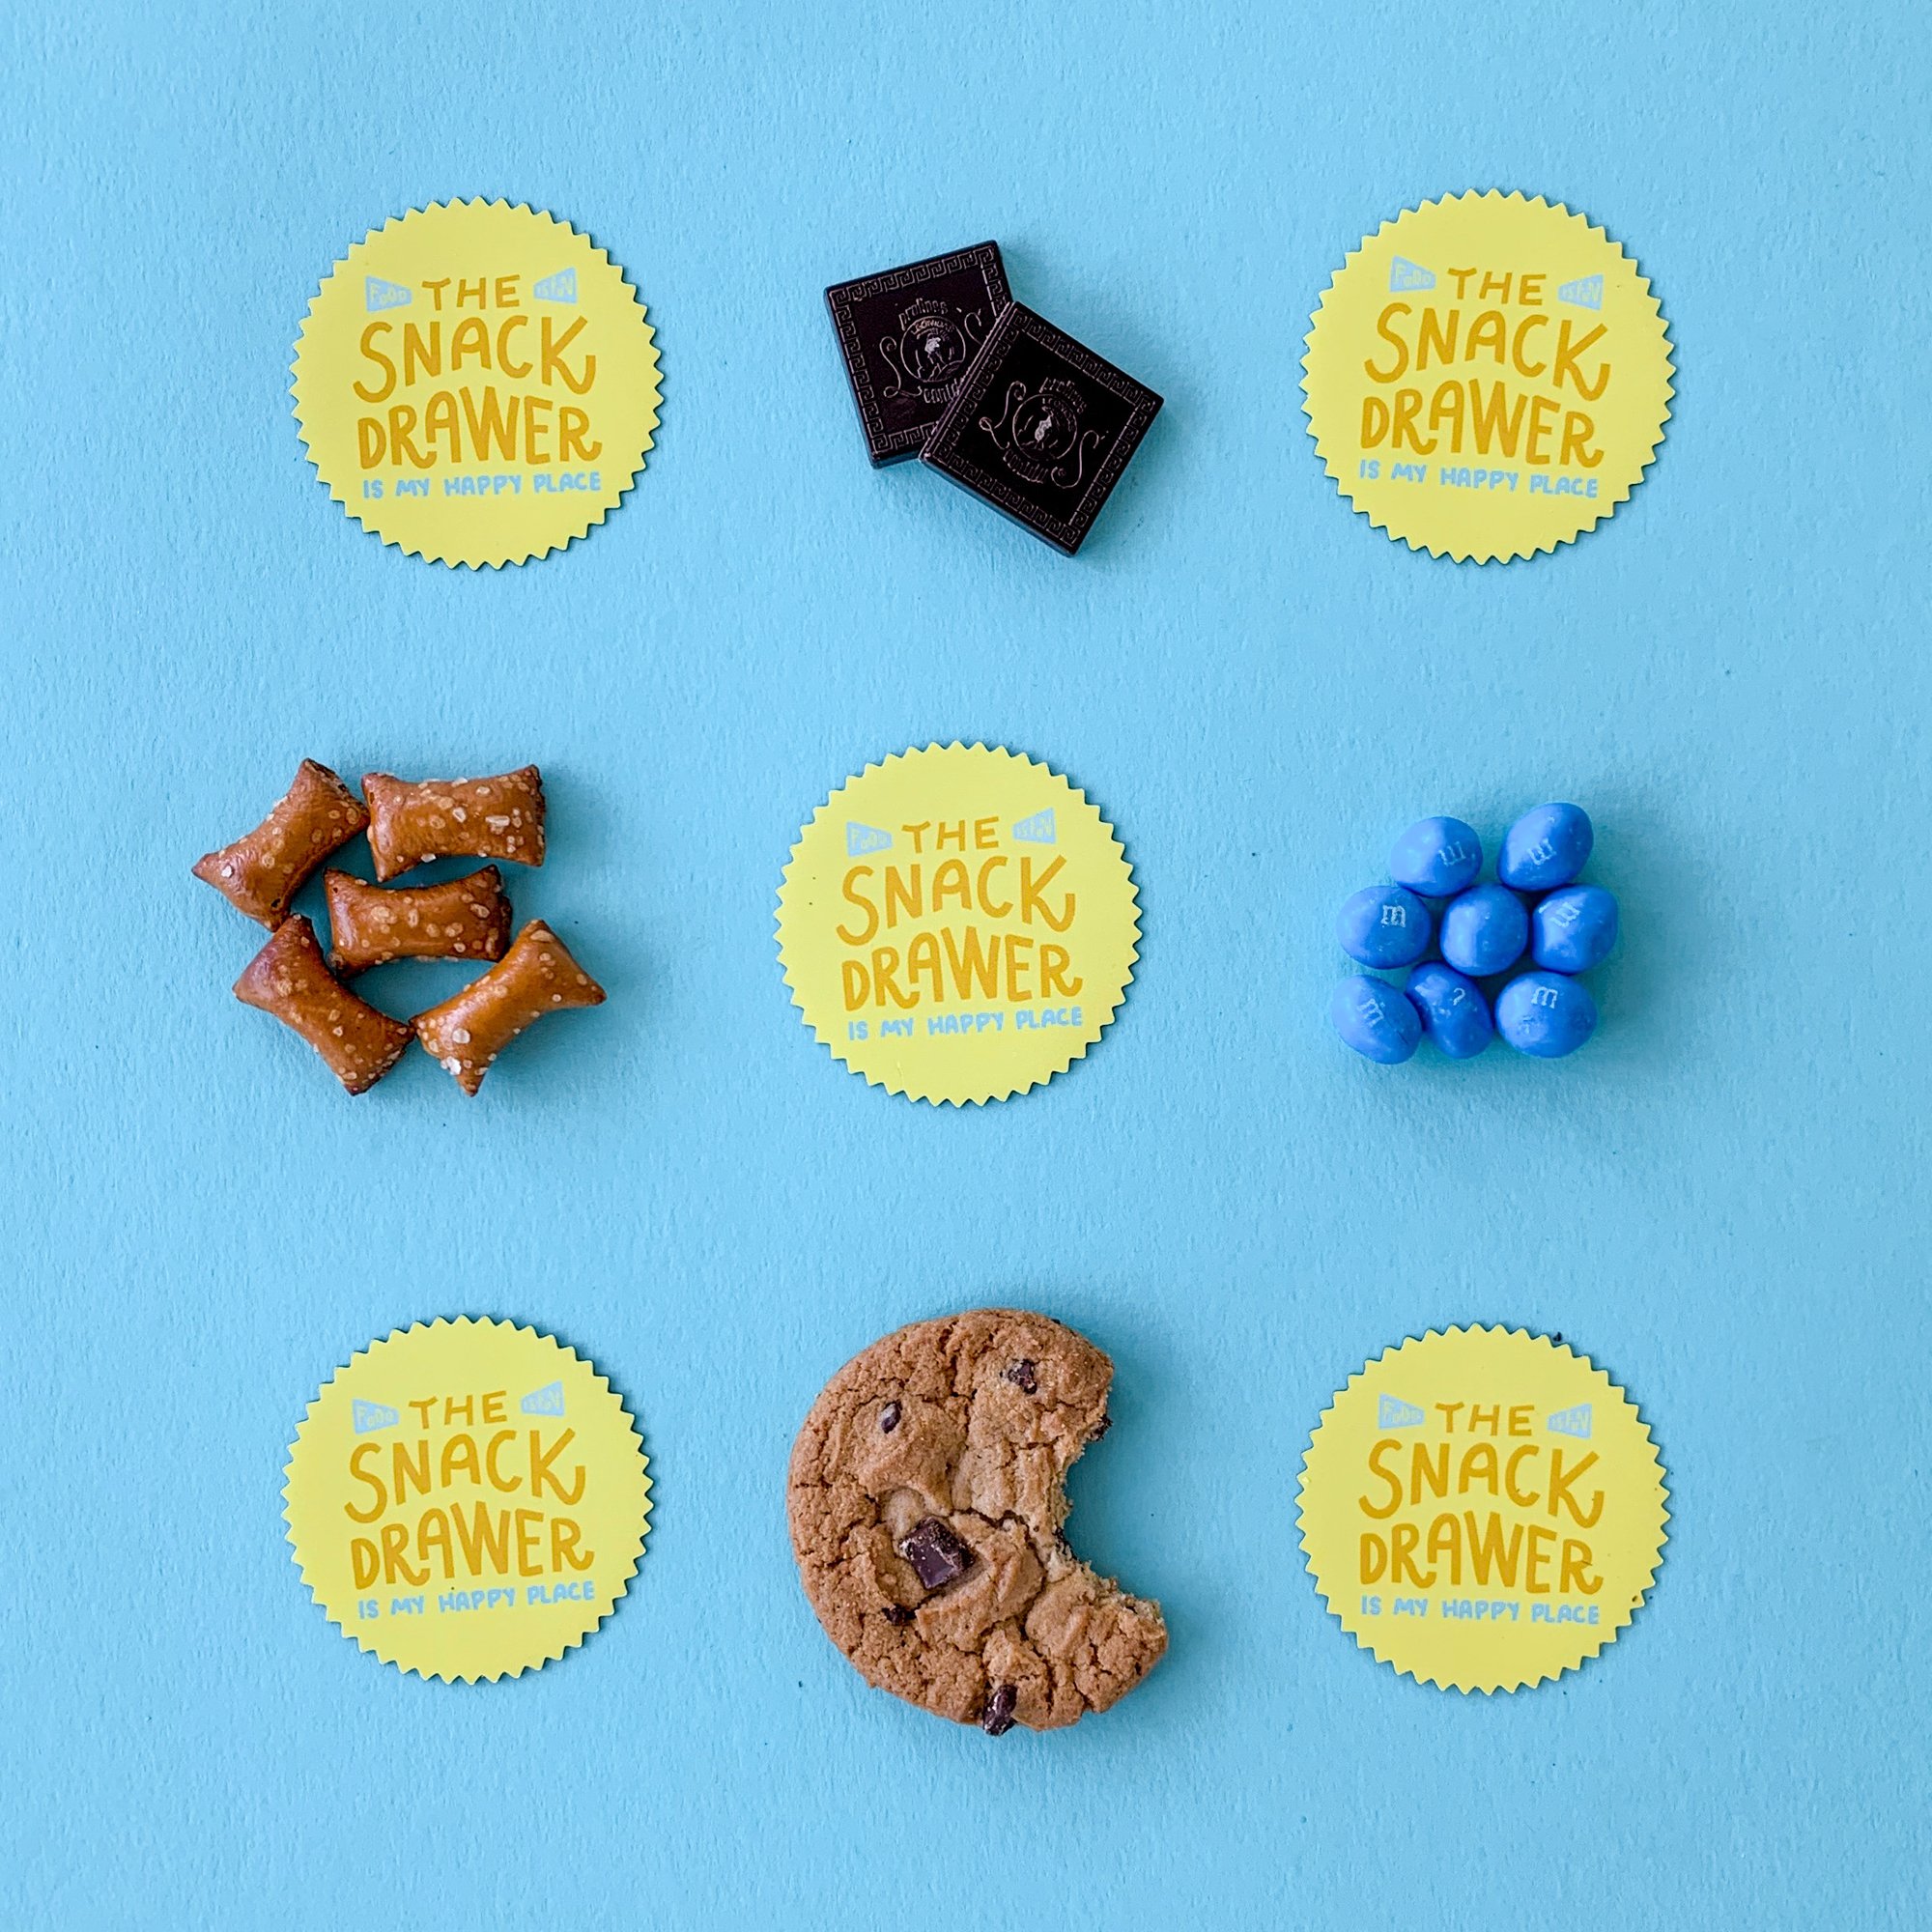 Snack Drawer Magnet with Snacks 1x1.jpg